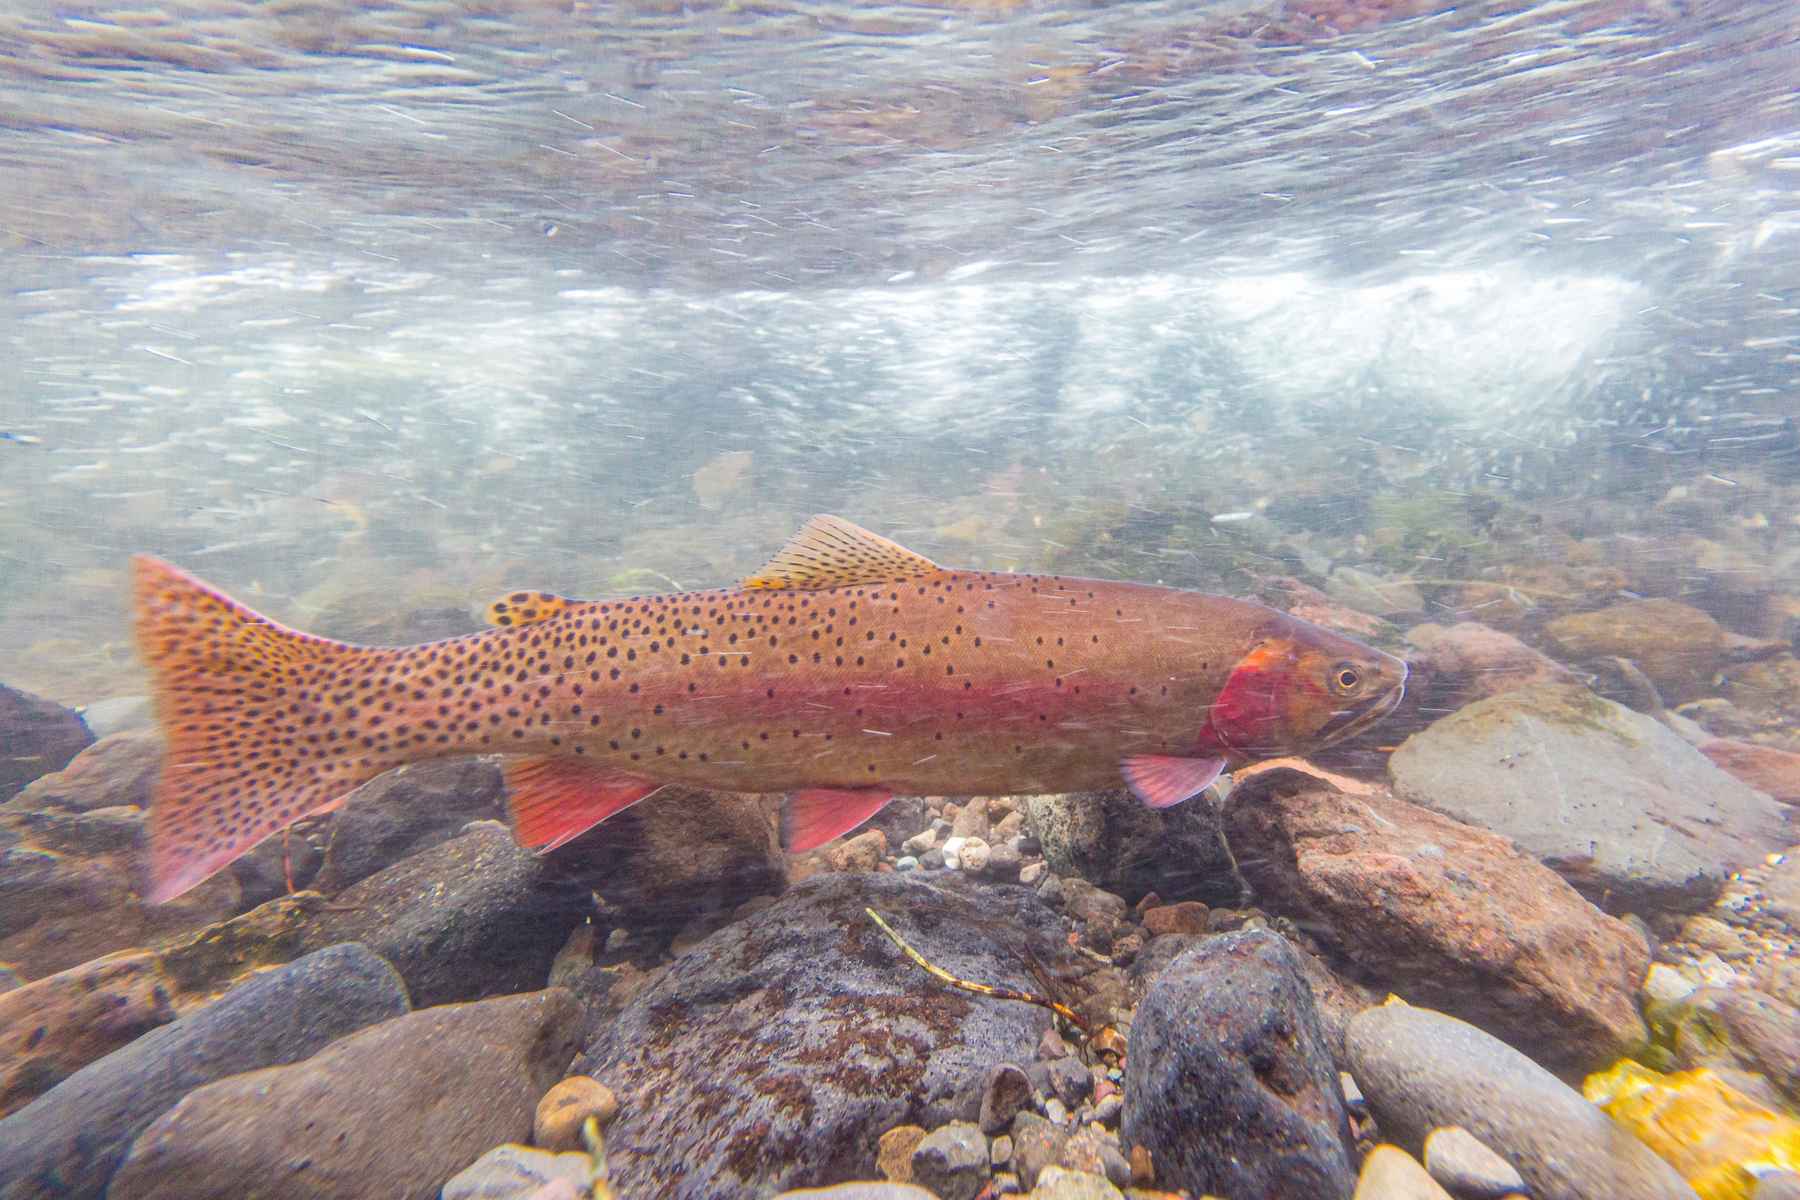 Group sues to block plan to save Yellowstone cutthroat trout by relocating them